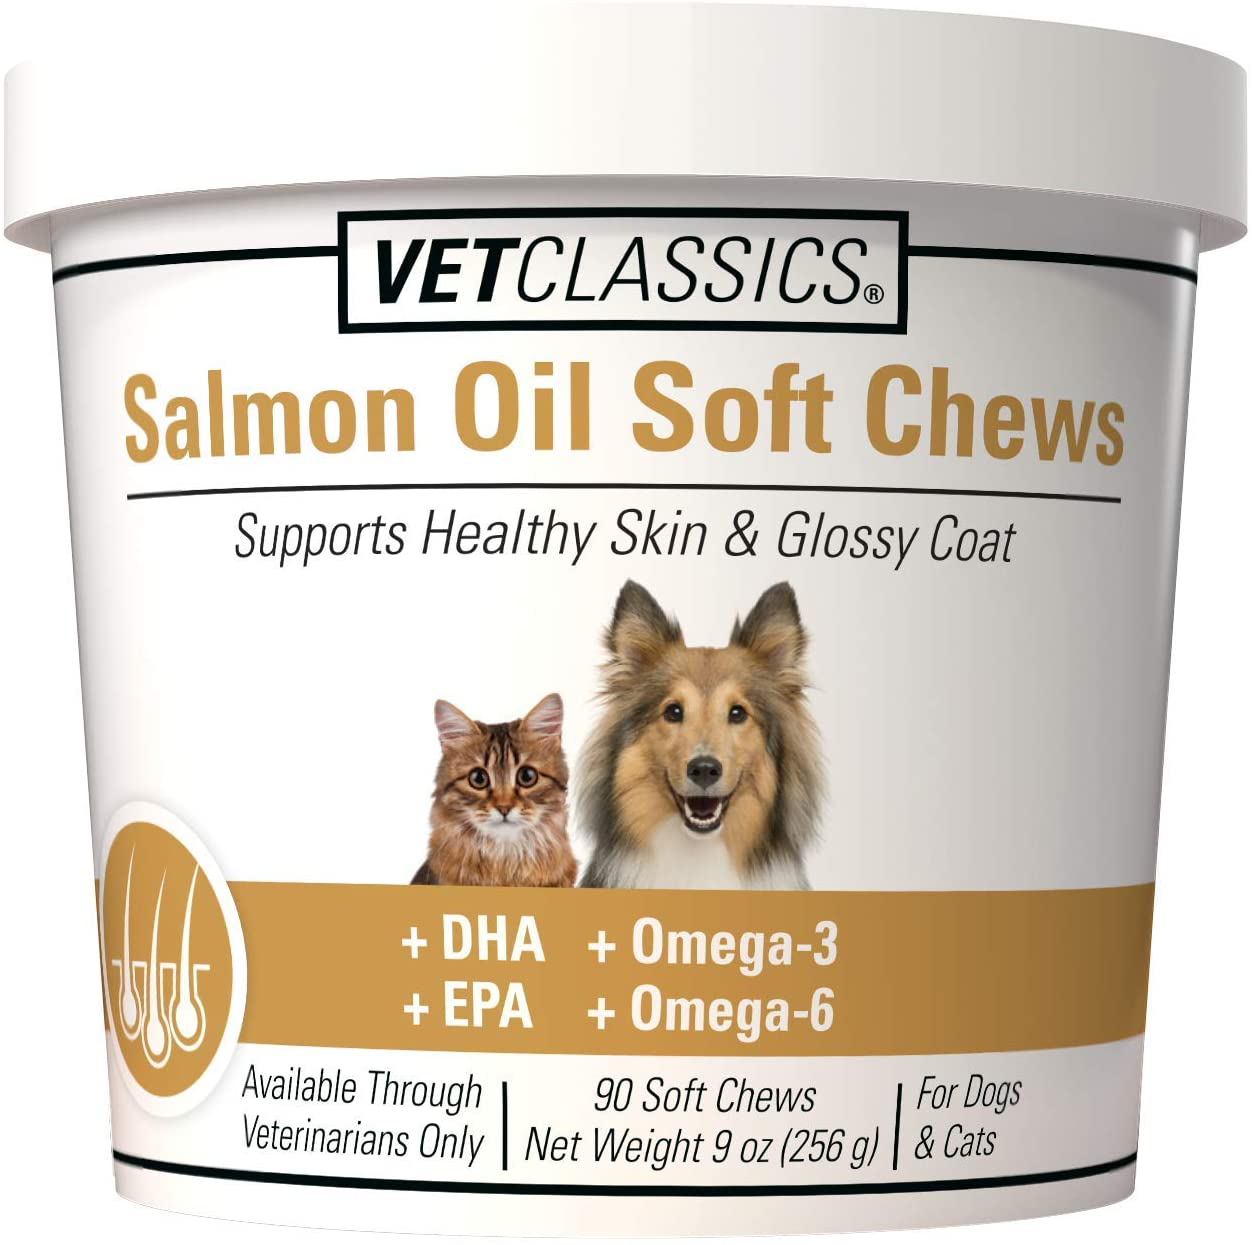 Vet Classics Salmon Oil Pet Supplement for Healthy Skin, Glossy Coats – Dog Coat Supplement, Cat Skin Supplement – Includes Omega-3, 6, 9, Source of DHA, EPA – Soft Chews 90 Ct.